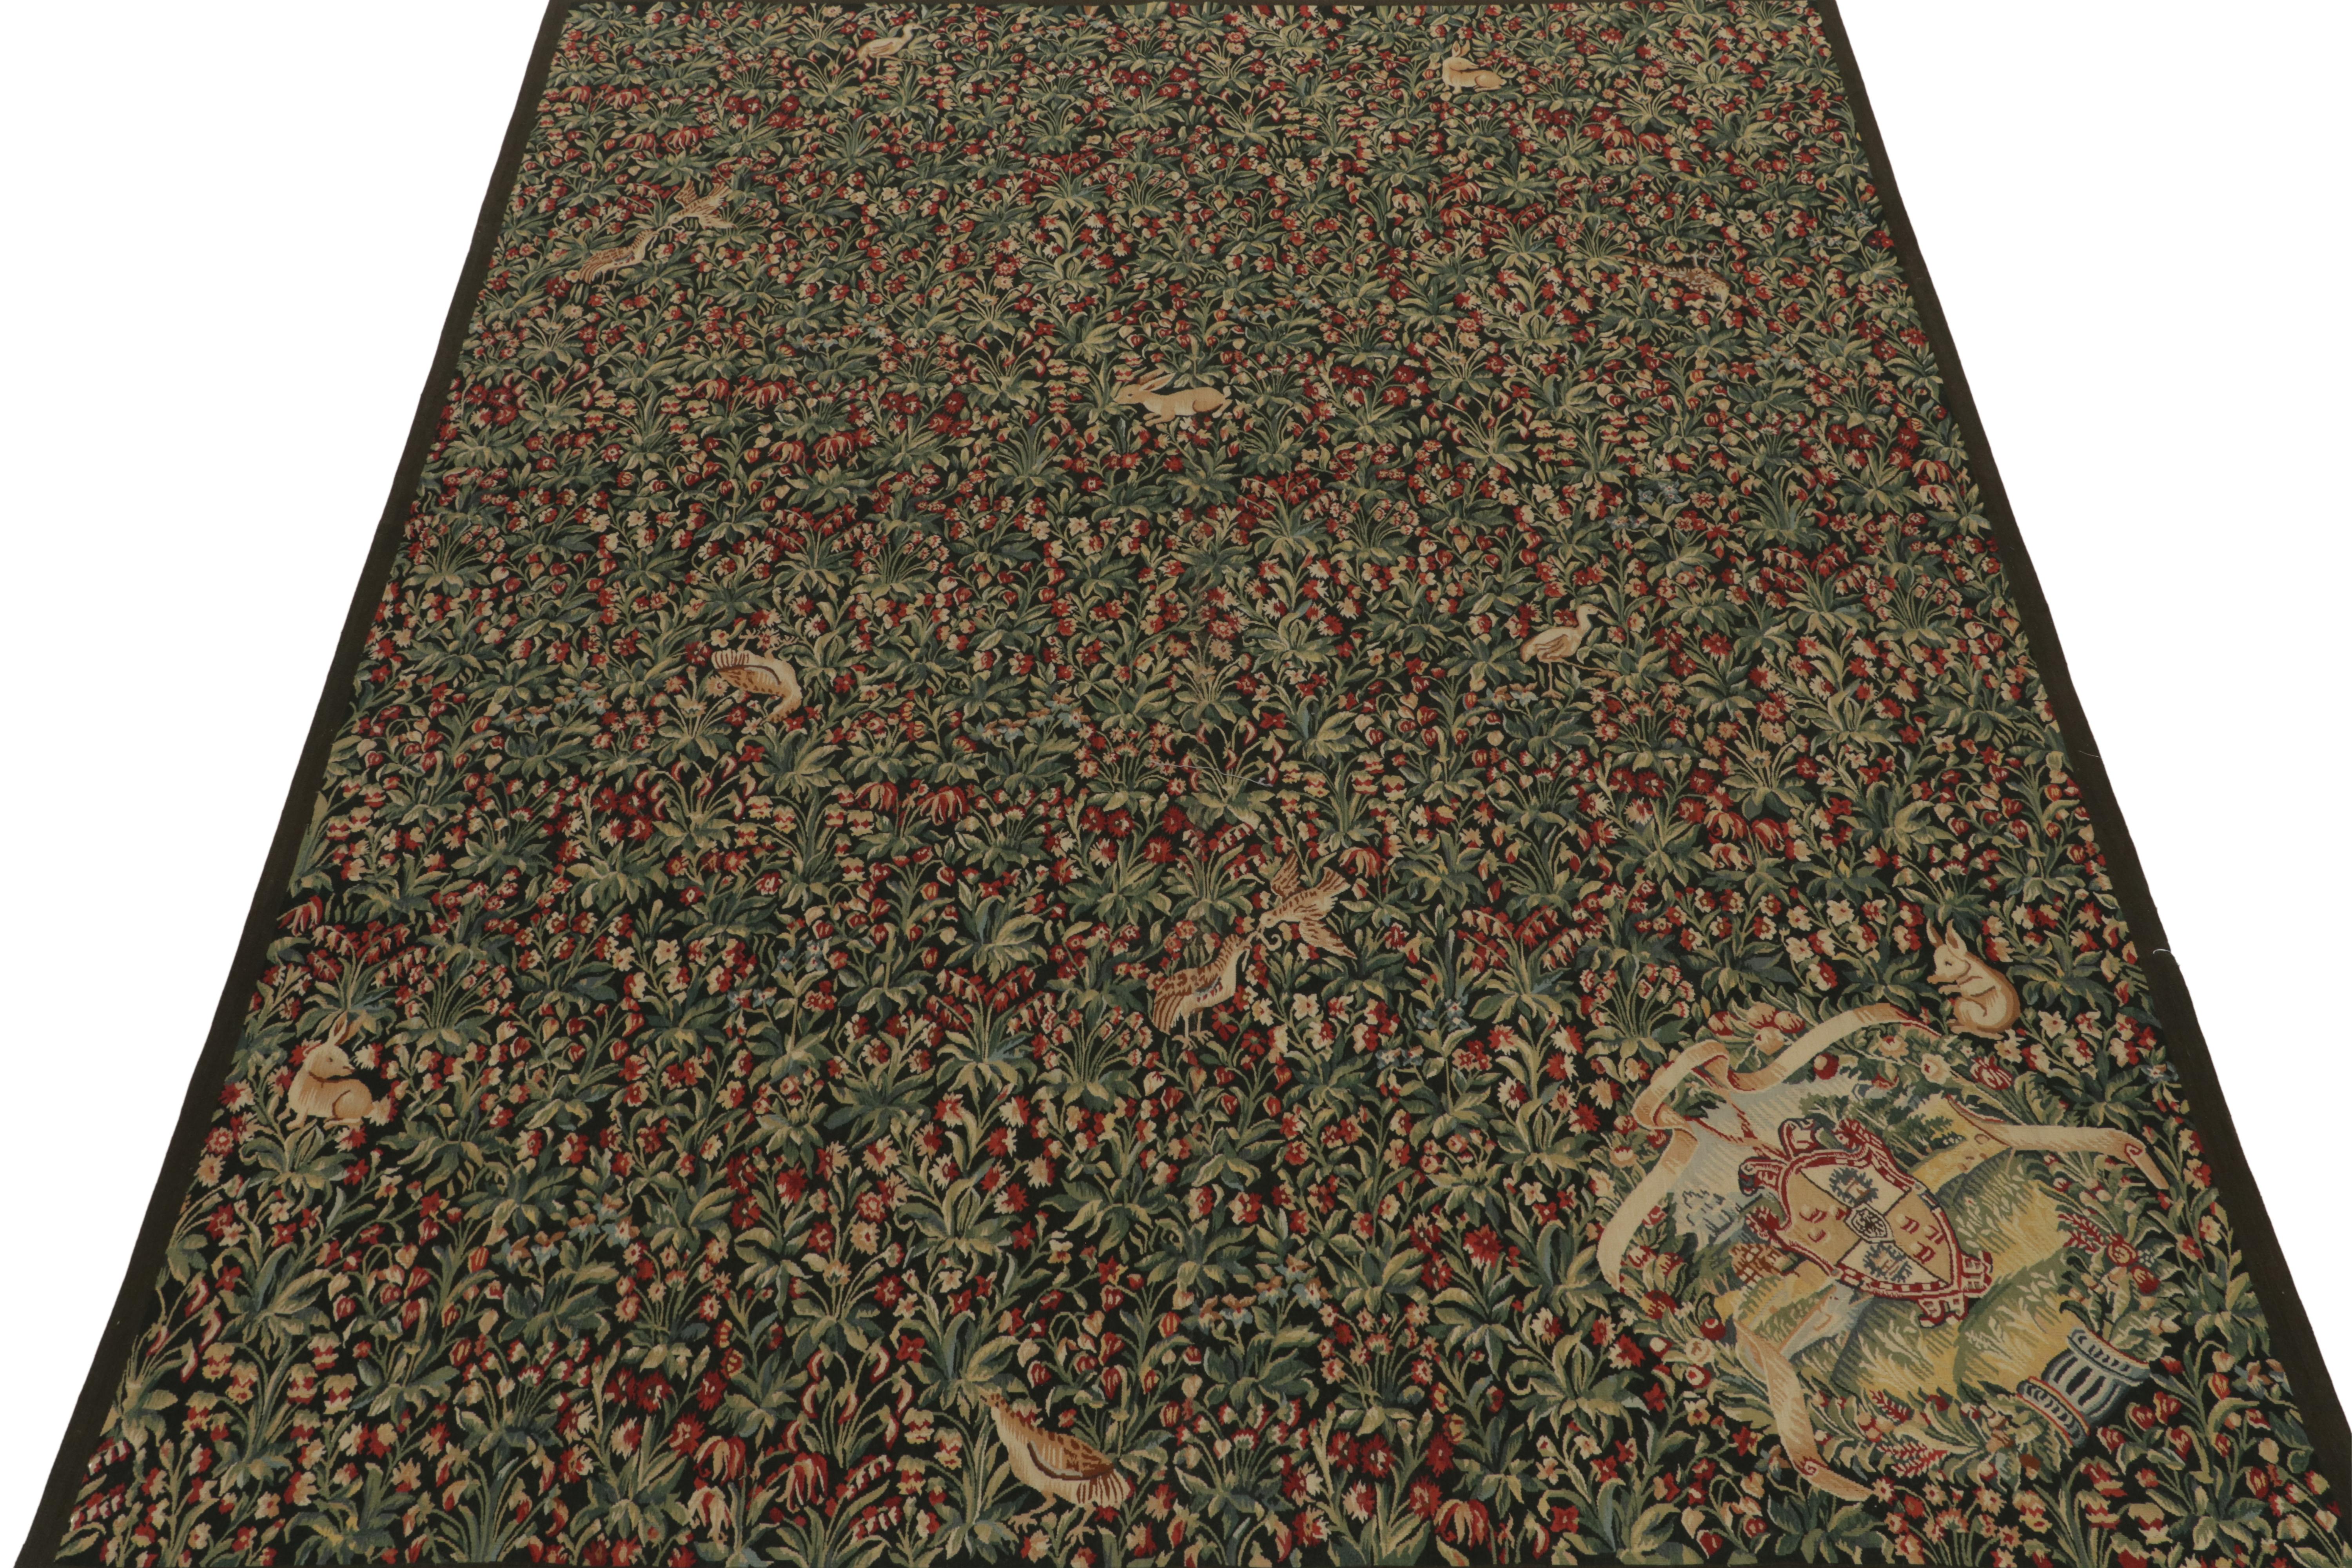 Chinese Rug & Kilim’s Tudor Style Kilim in Green and Red Florals with Beige Pictorials For Sale